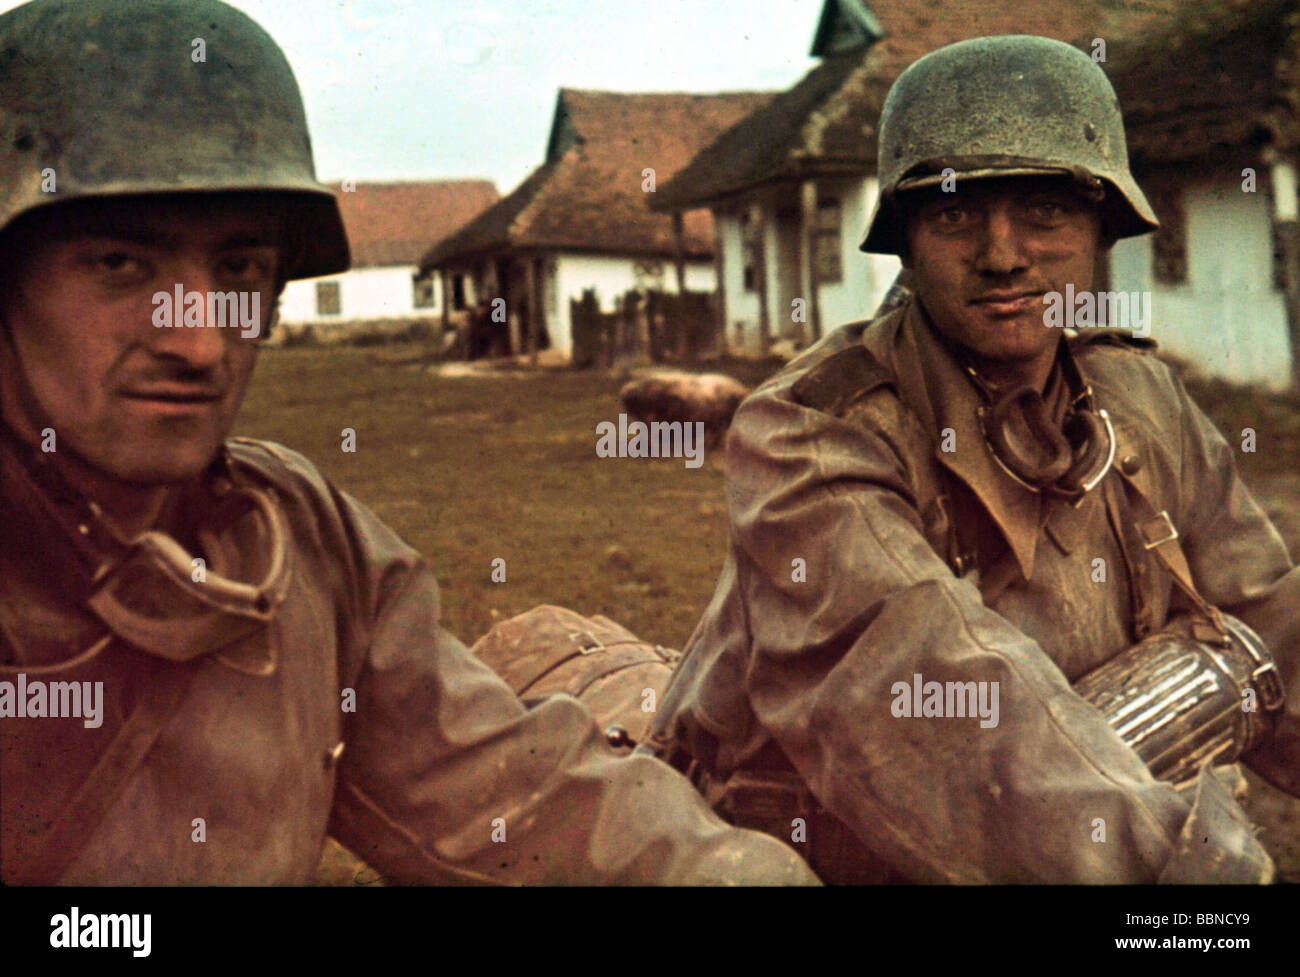 events, Second World War / WWII, Russia 1942 / 1943, Nogai Steppe, two German dispatch riders in a Russian village, August 1942, Stock Photo